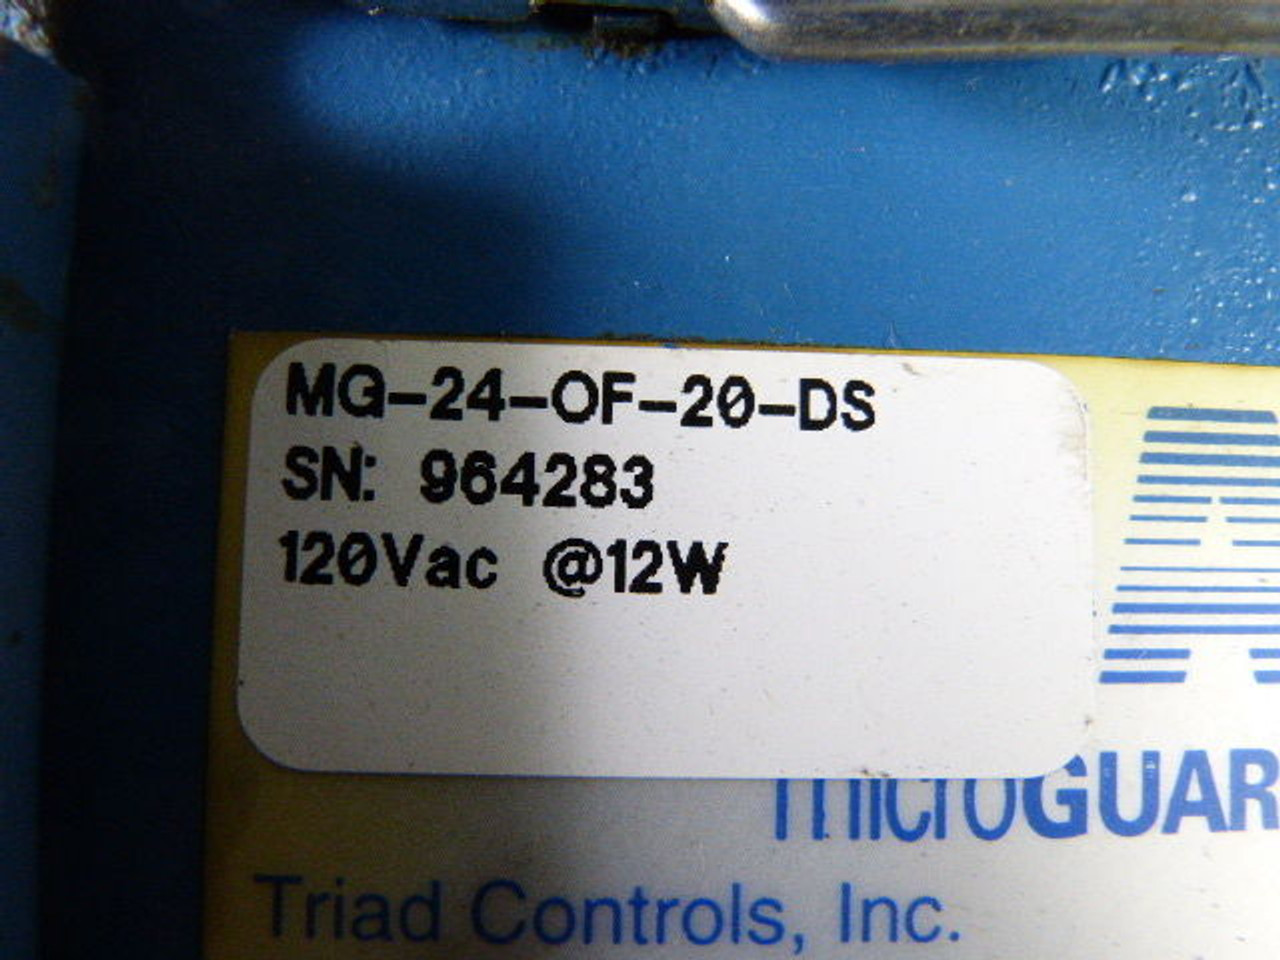 Pinnacle MG-24-OF-20-DS MicroGuard Light Curtain Controller 120VAC @ 12W USED